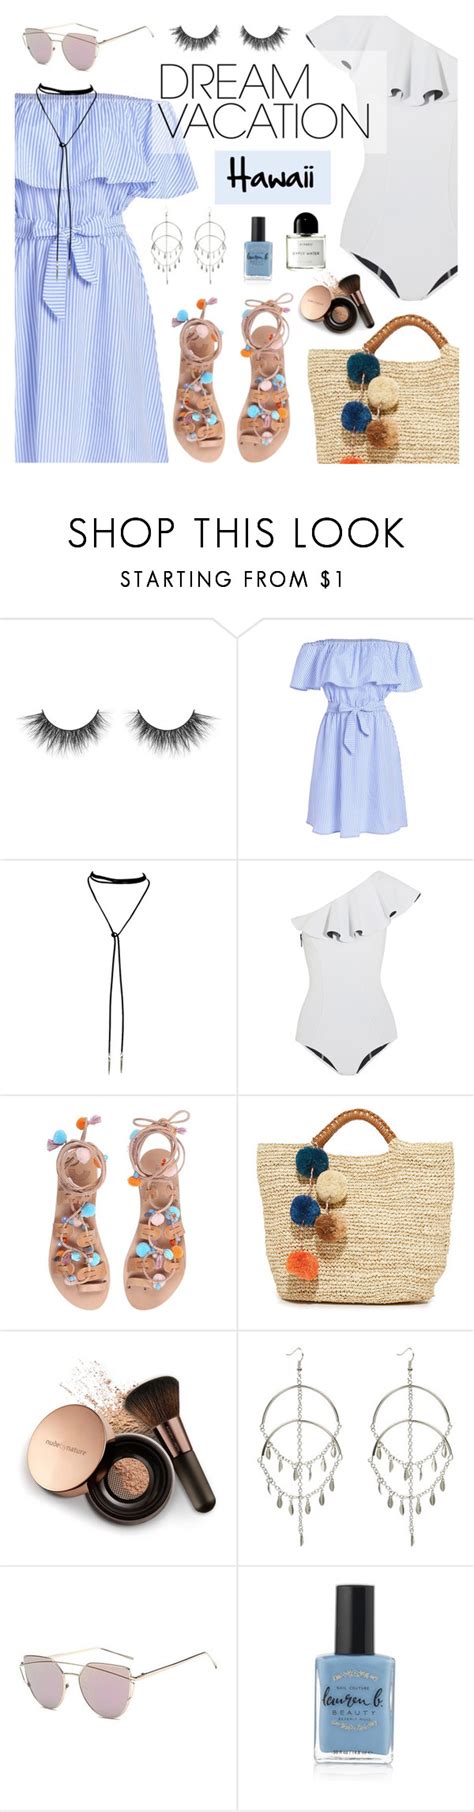 Polypresents Dream Vacation By Dora On Polyvore Featuring Lisa